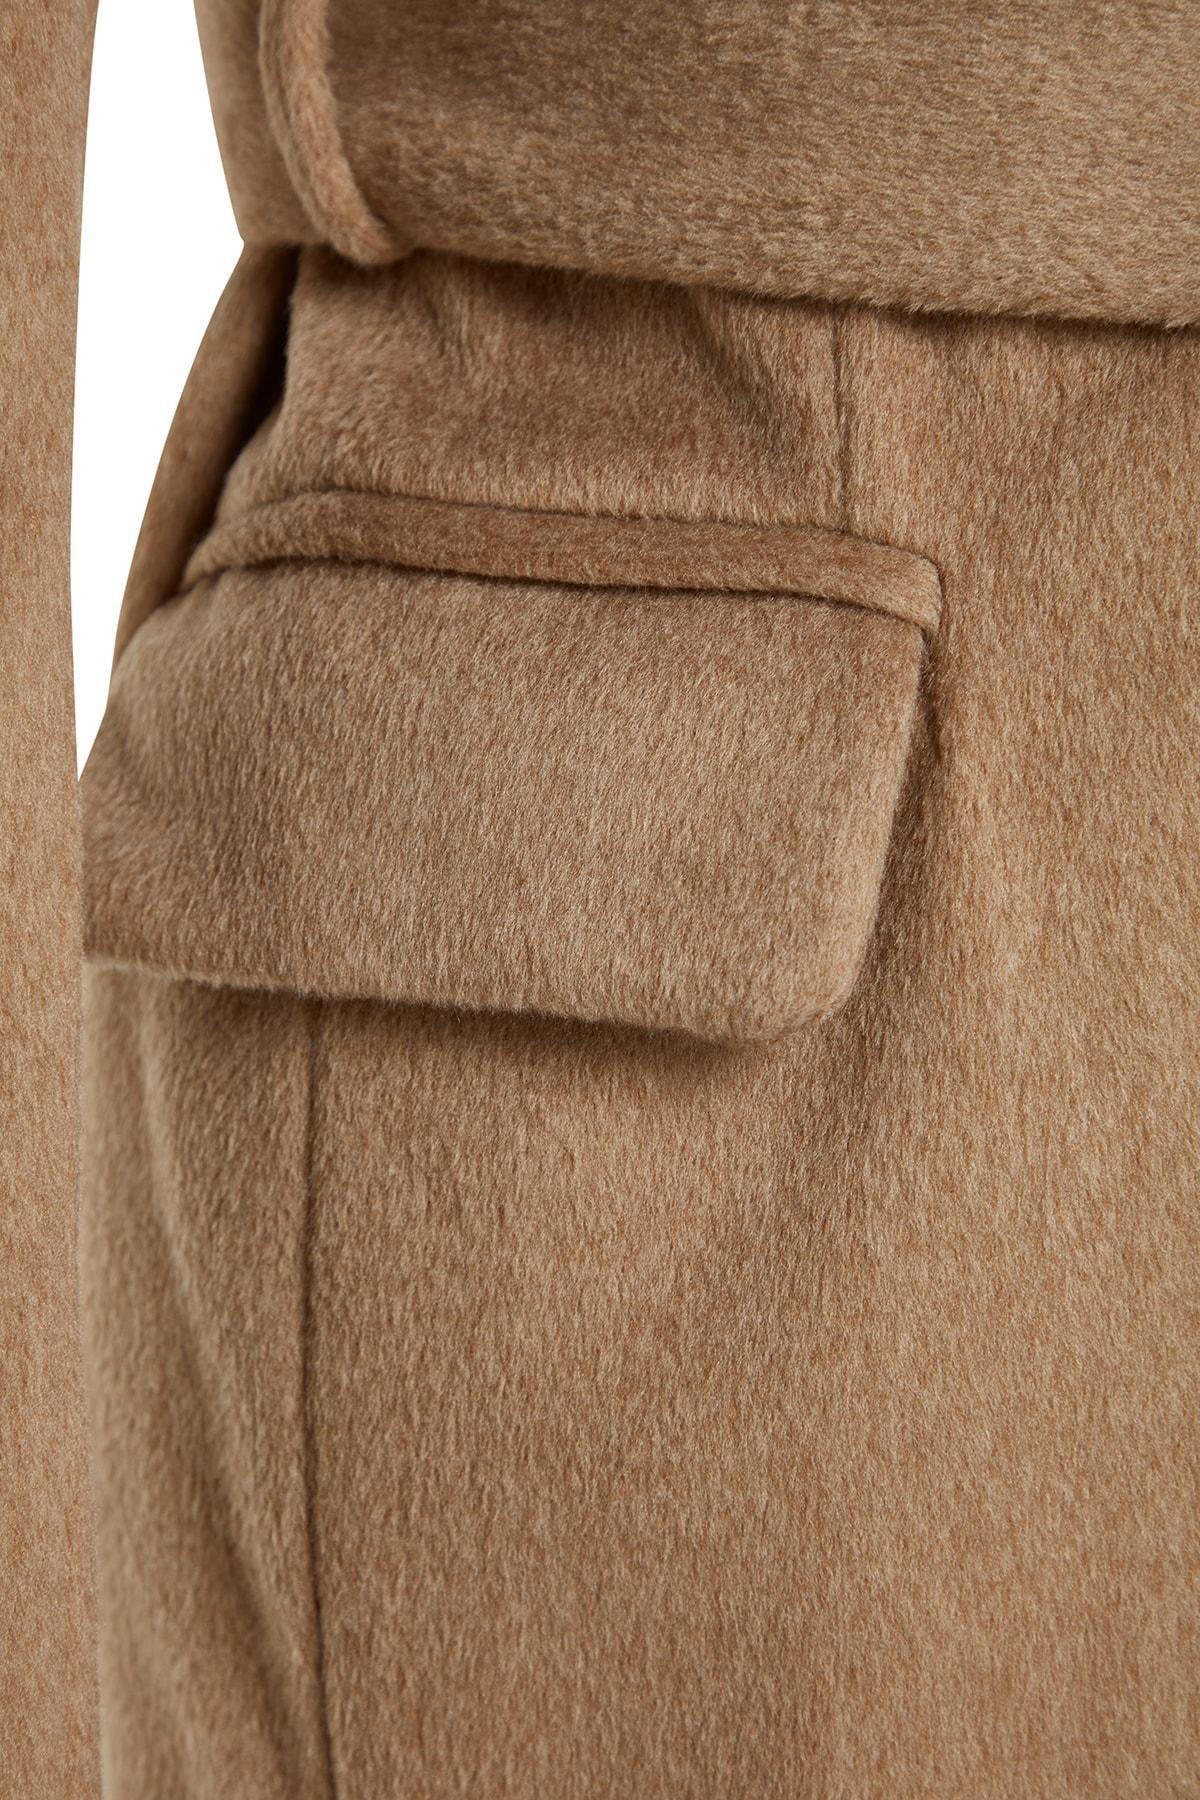 Trendyol - Brown Oversize Wide Cut Long Stitched Coat